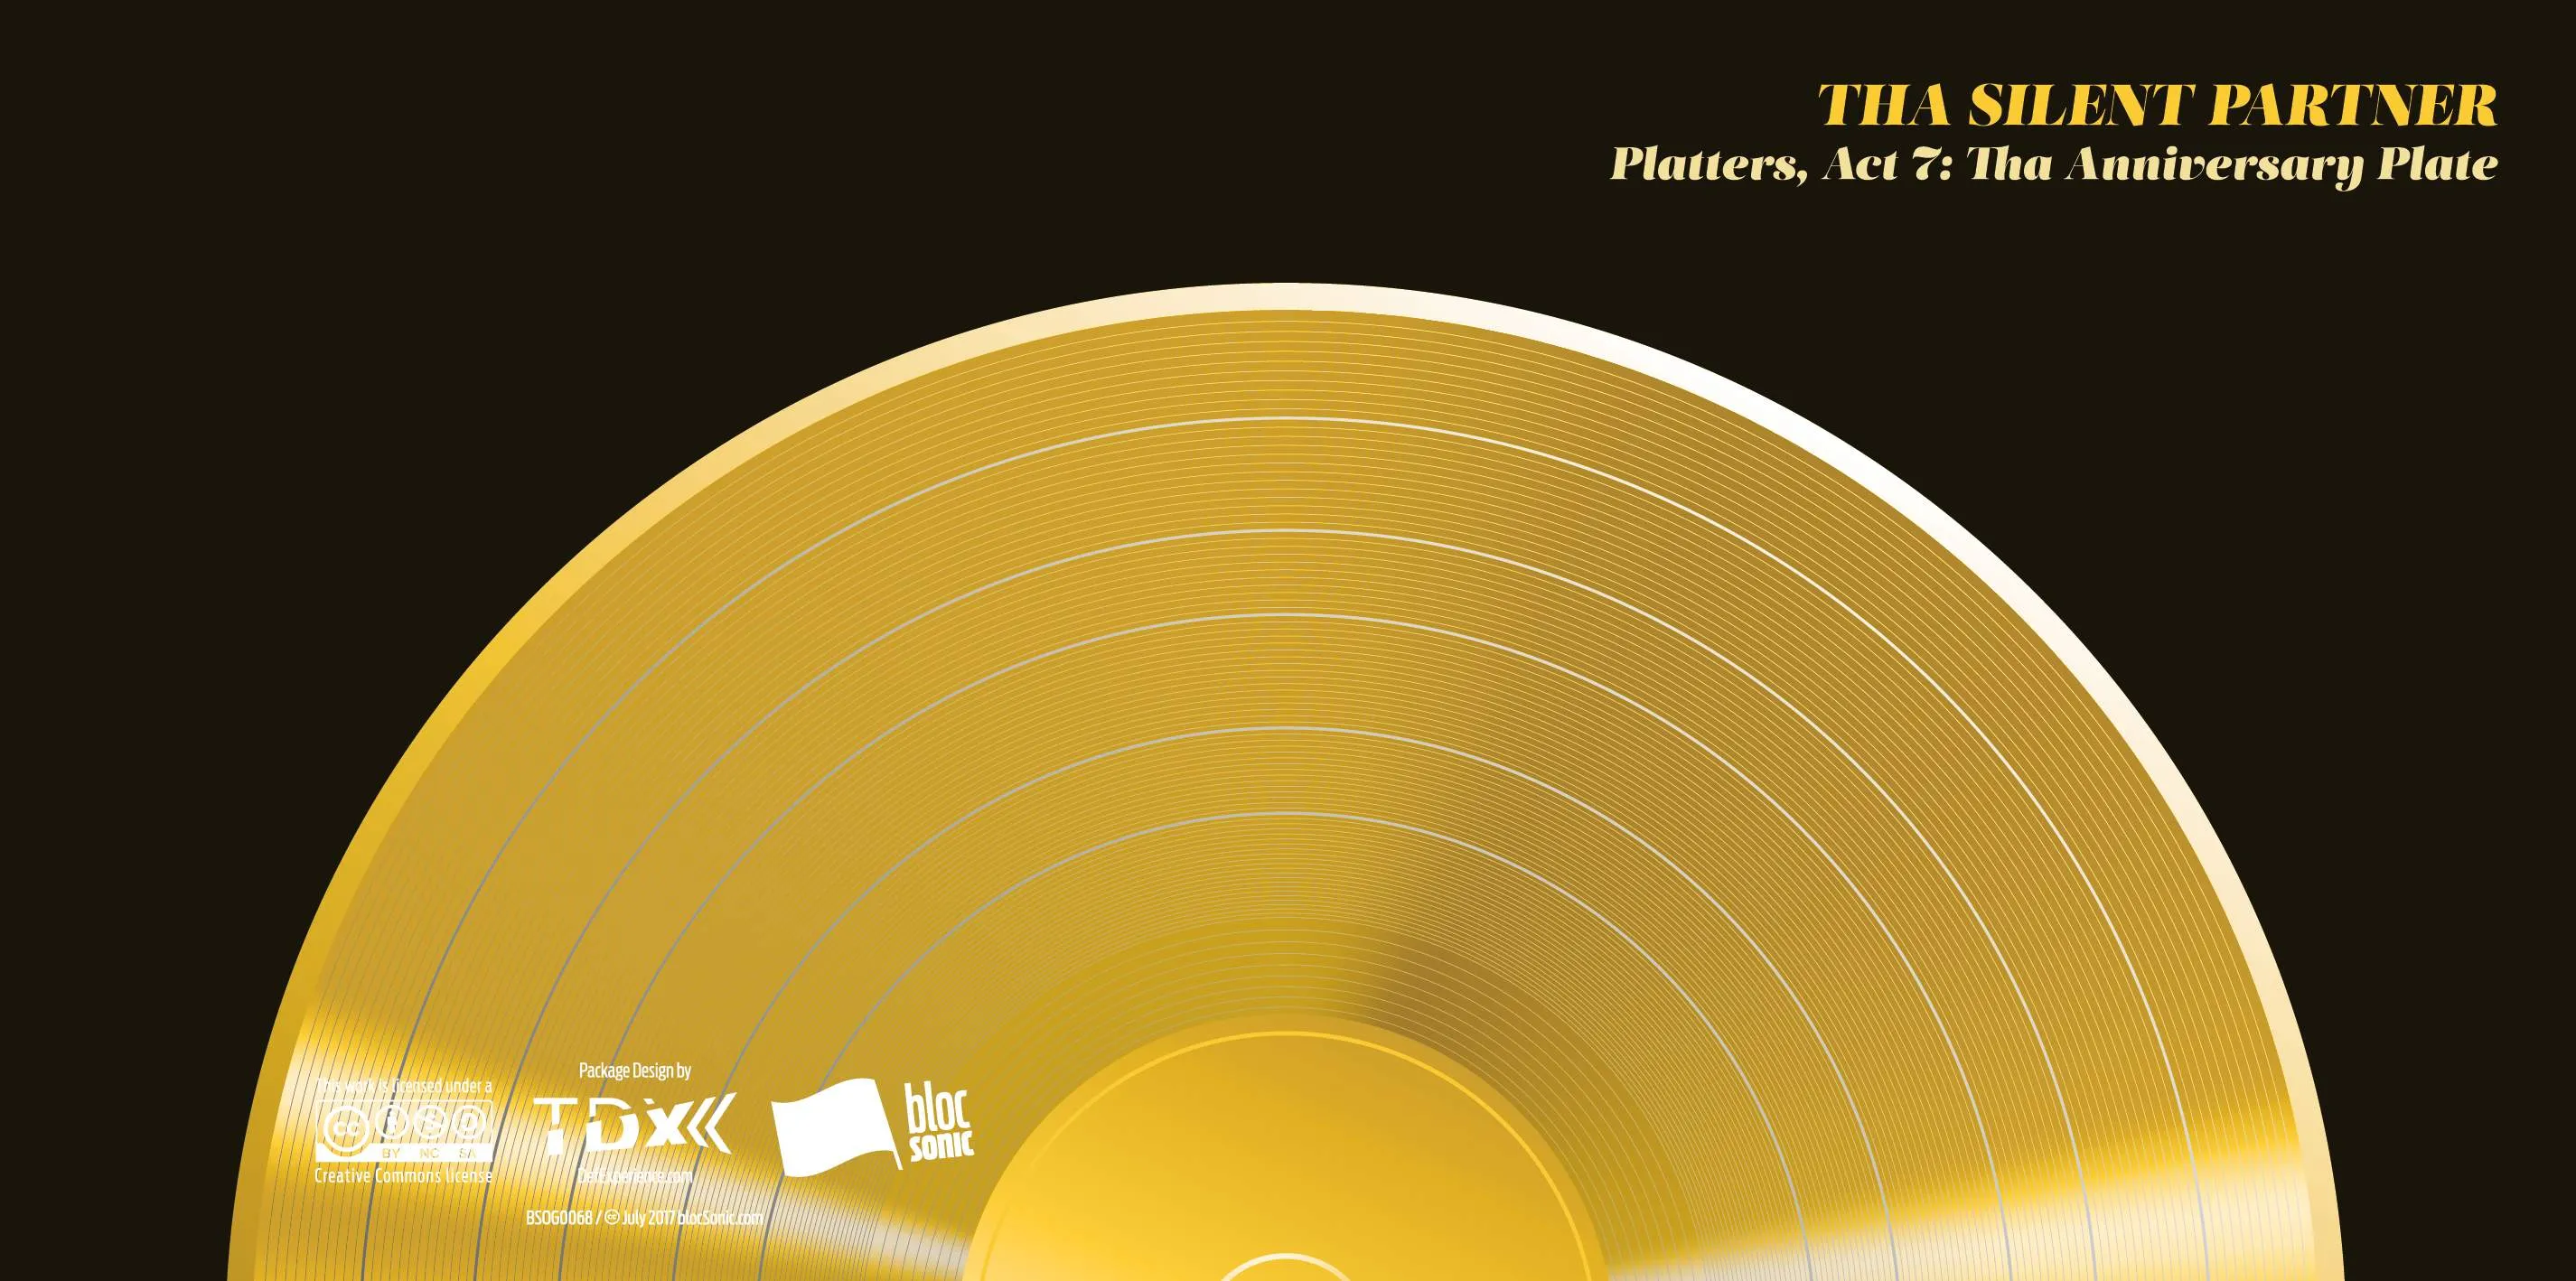 Album insert for “Platters, Act 7: Tha Anniversary Plate” by Tha Silent Partner